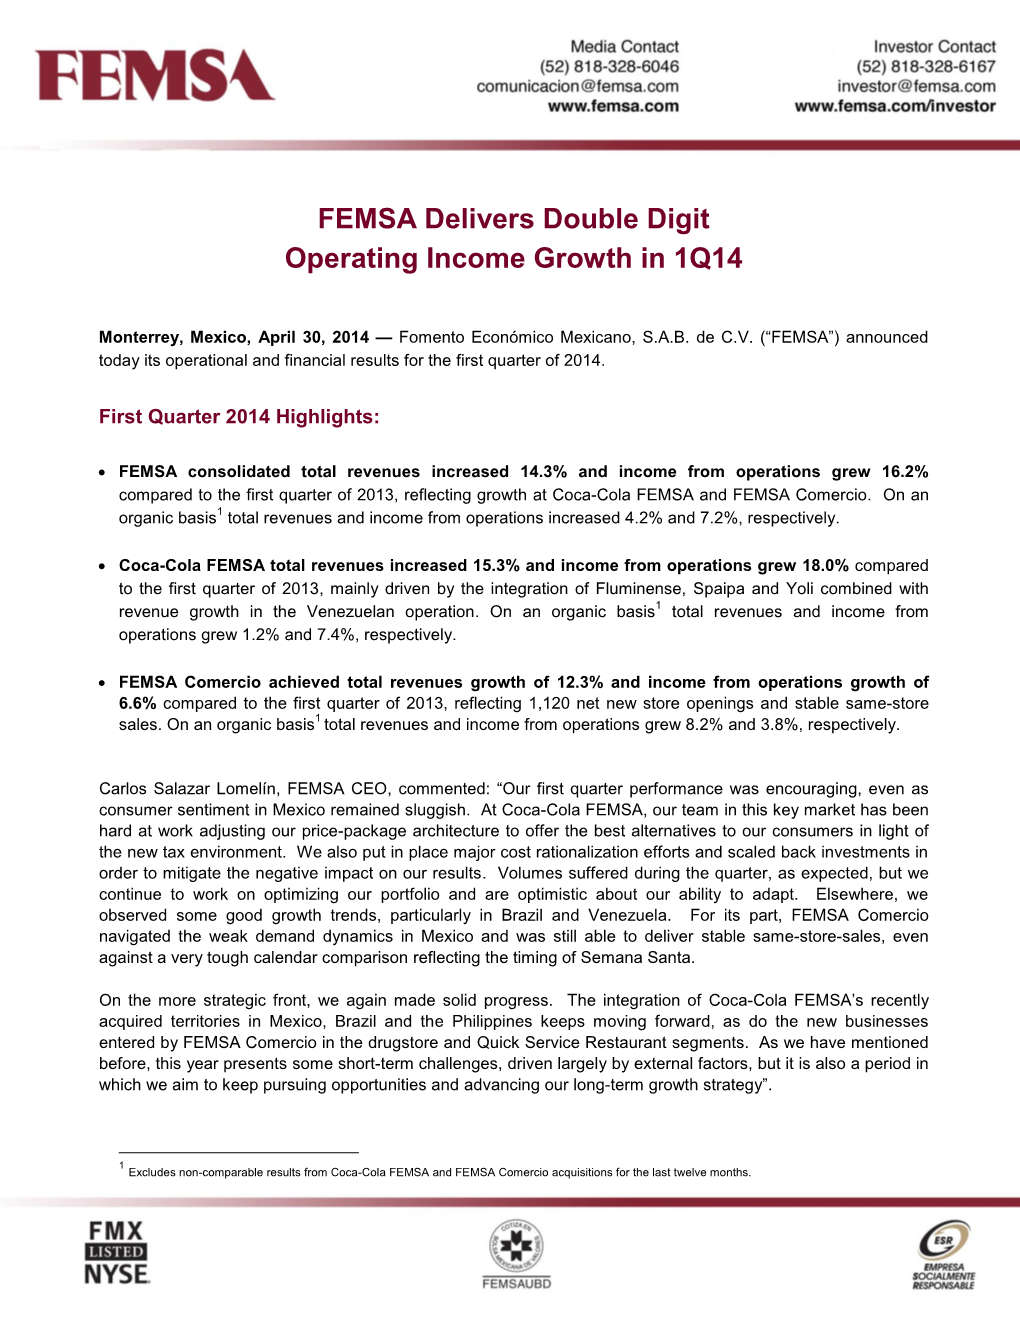 FEMSA Delivers Double Digit Operating Income Growth in 1Q14